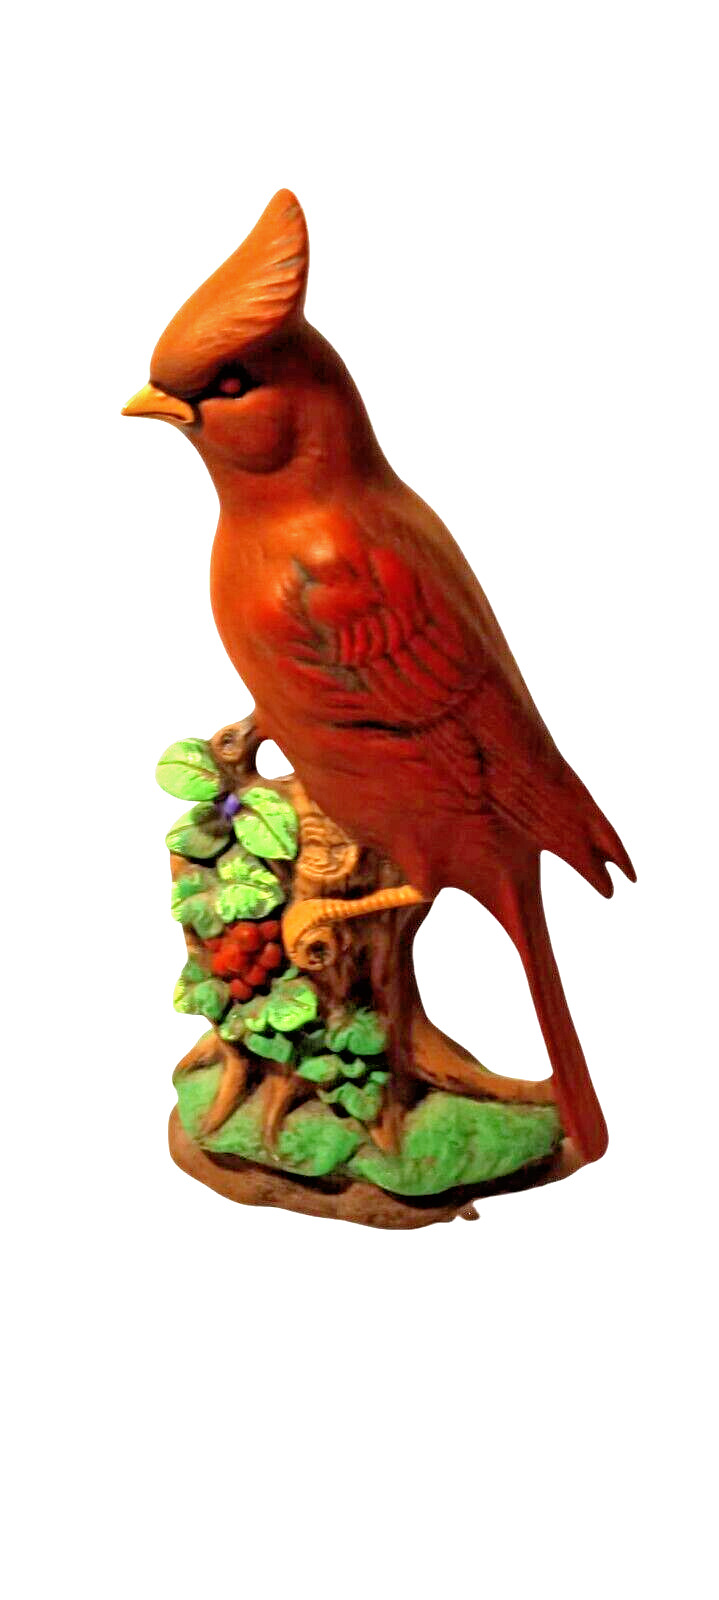 VINTAGE HAND PAINTED RED CARDINAL CERAMIC BIRD FIGURE ON LEAF WITH RED BERRIES